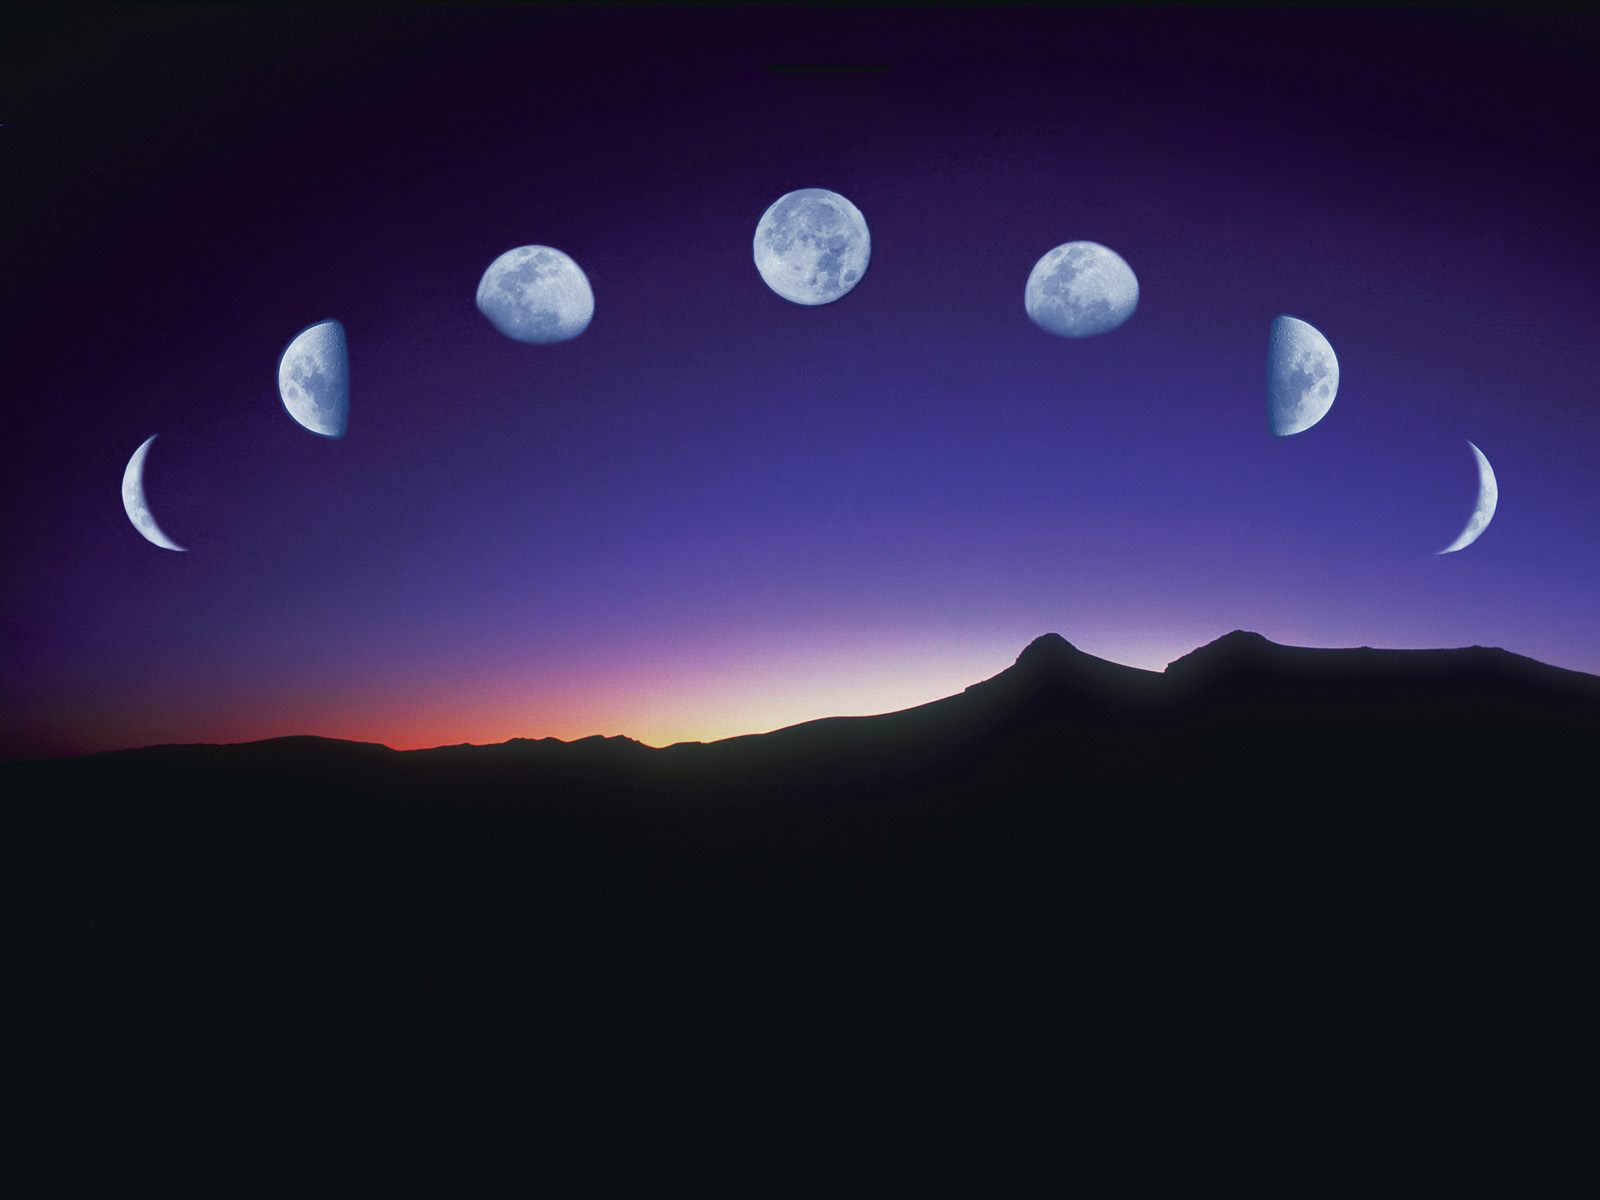 Cool Moon Background